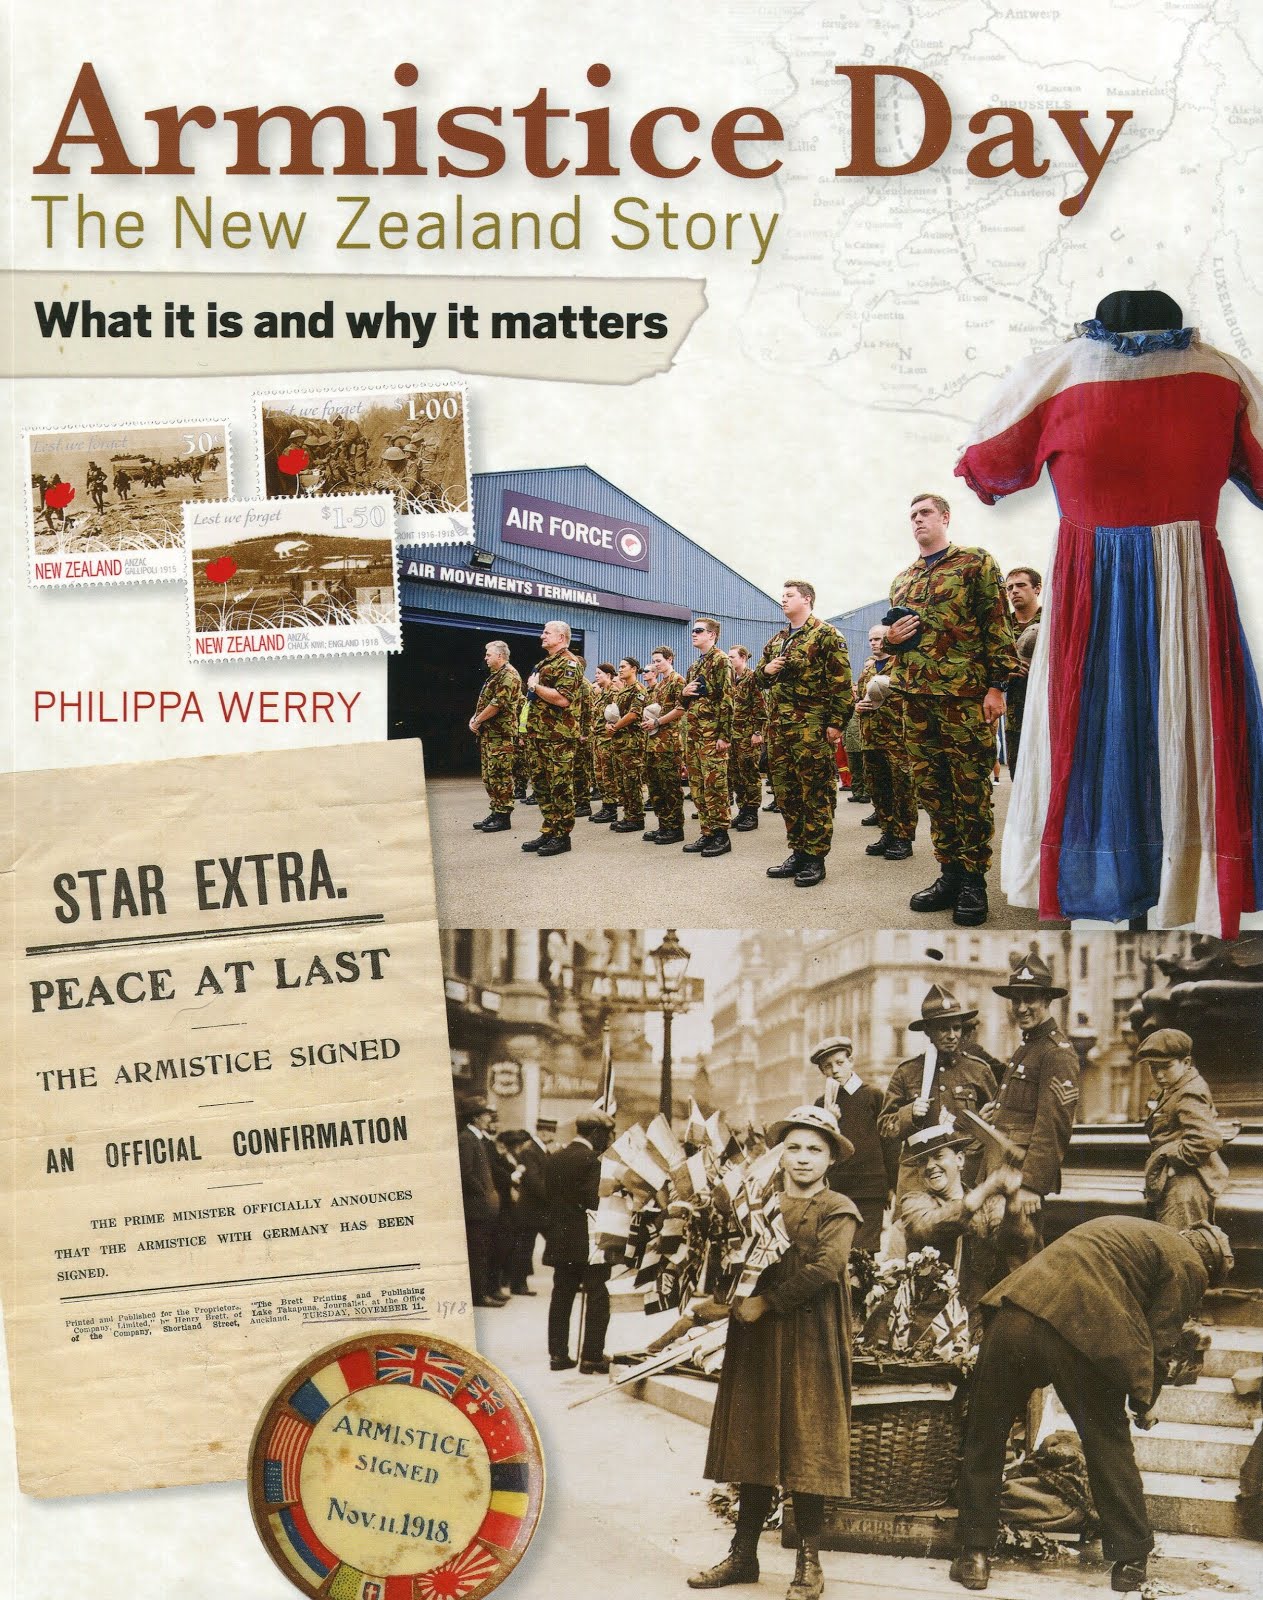 Armistice Day: the New Zealand story by Philippa Werry (New Holland, 2016)